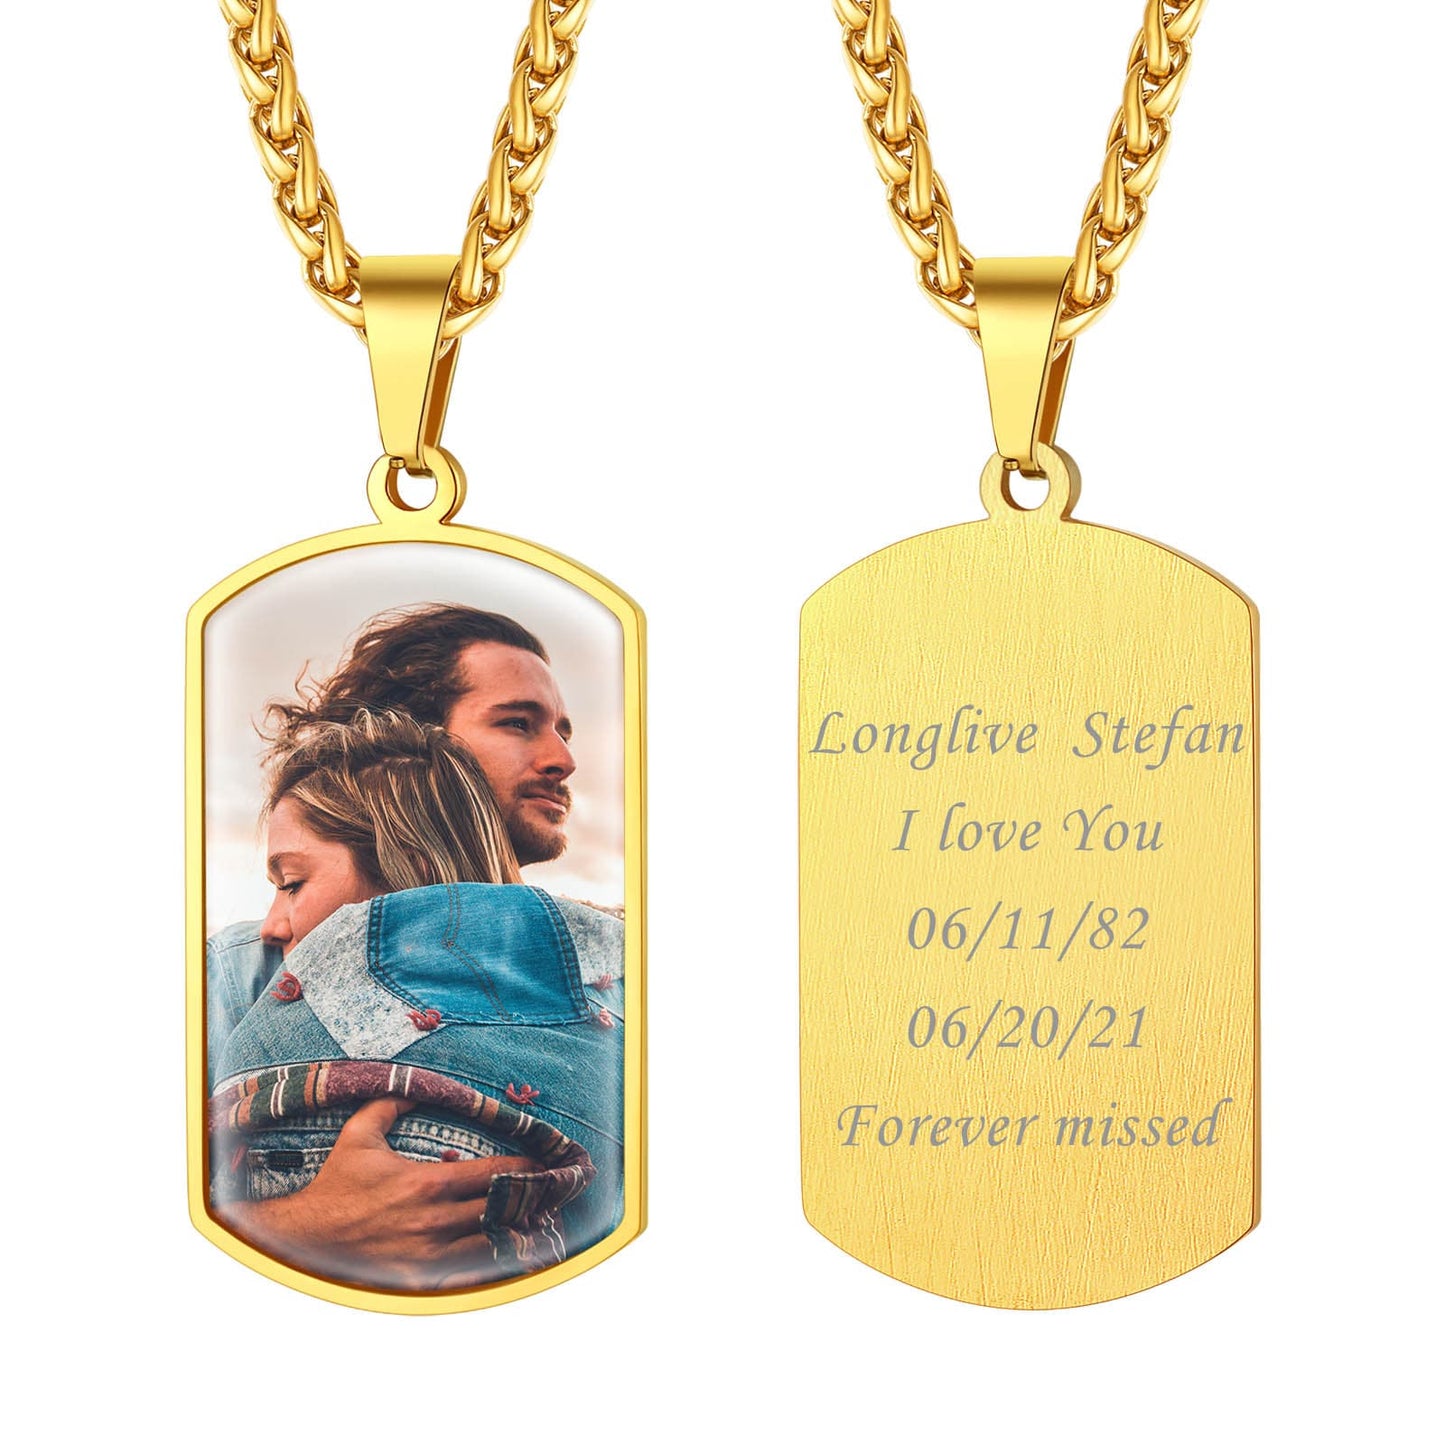 Customized Dog Tag Picture Necklaces for Men Woment Gold